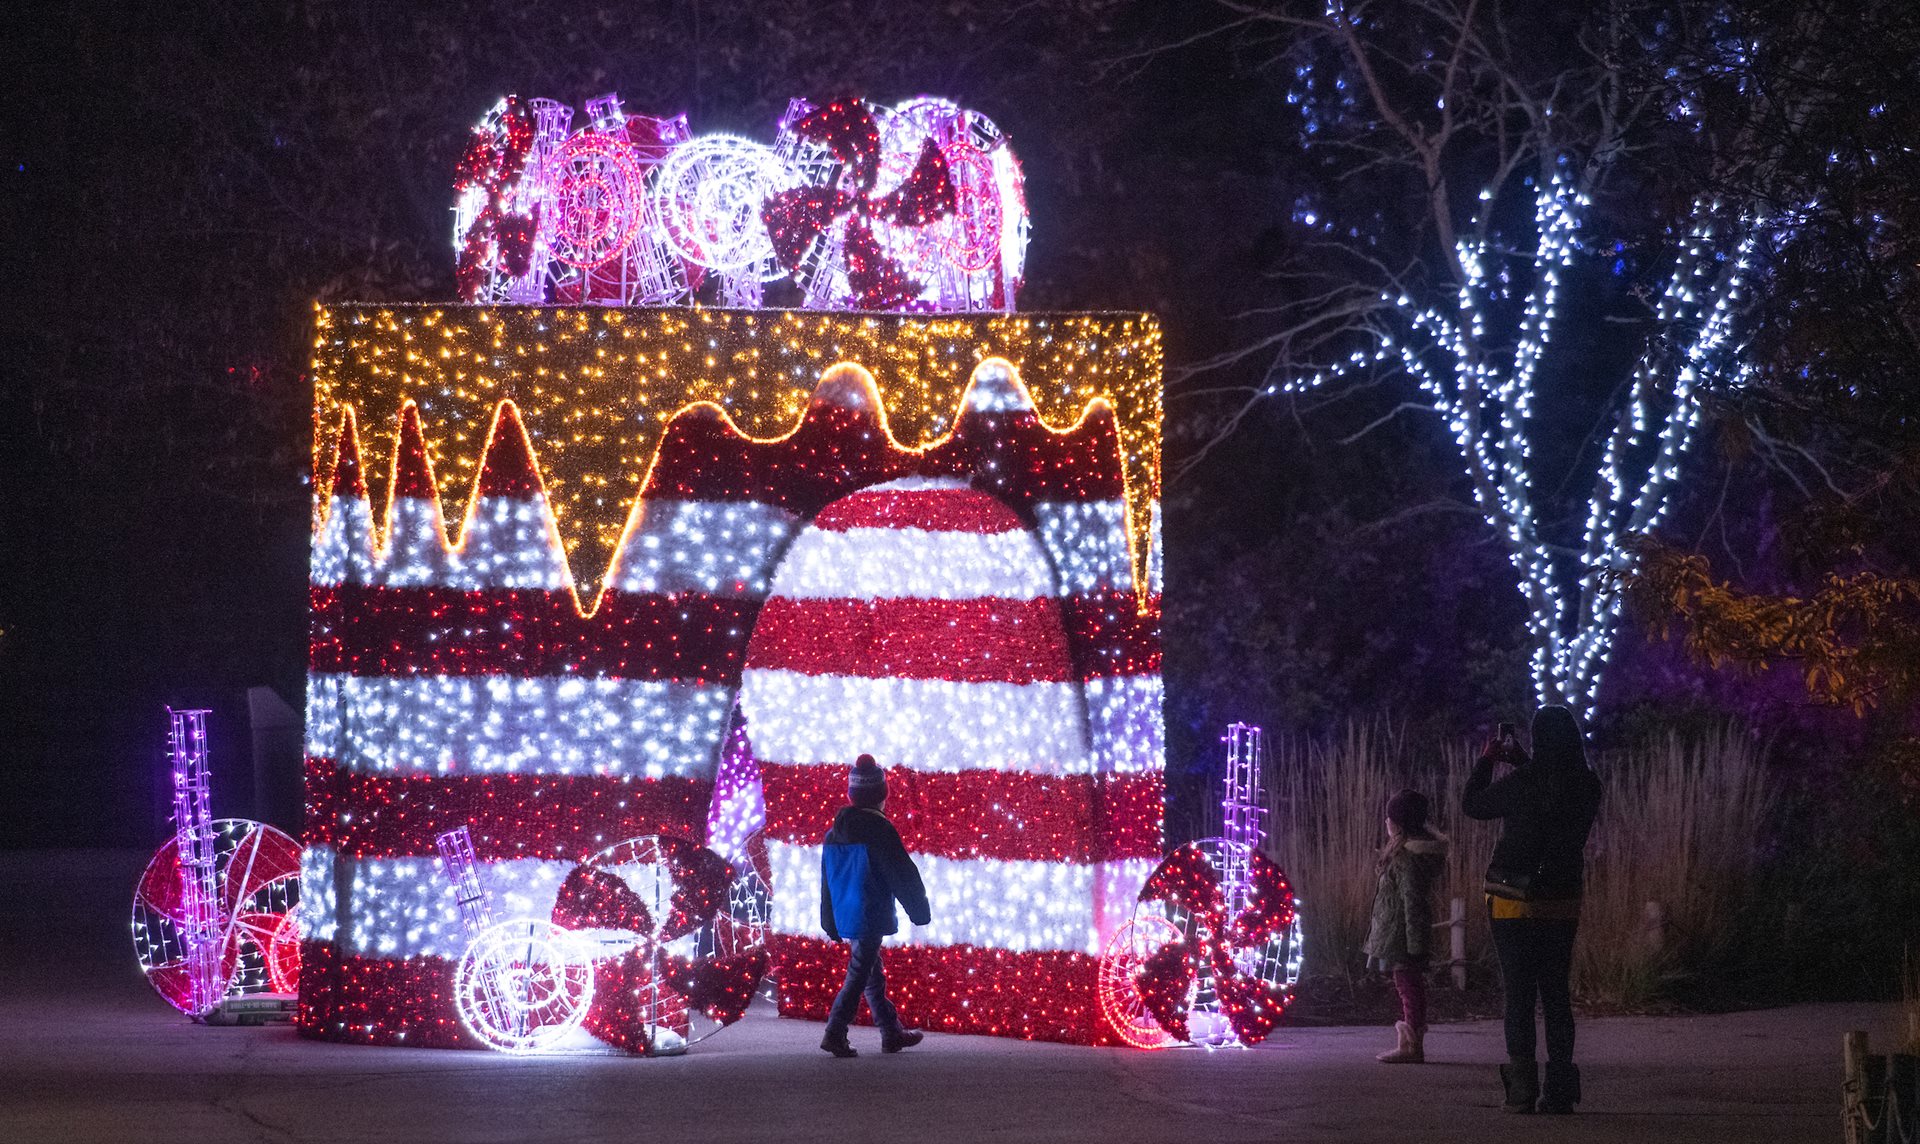 Wild Winter Lights Presented by NOPEC Returns to Cleveland Metroparks Zoo